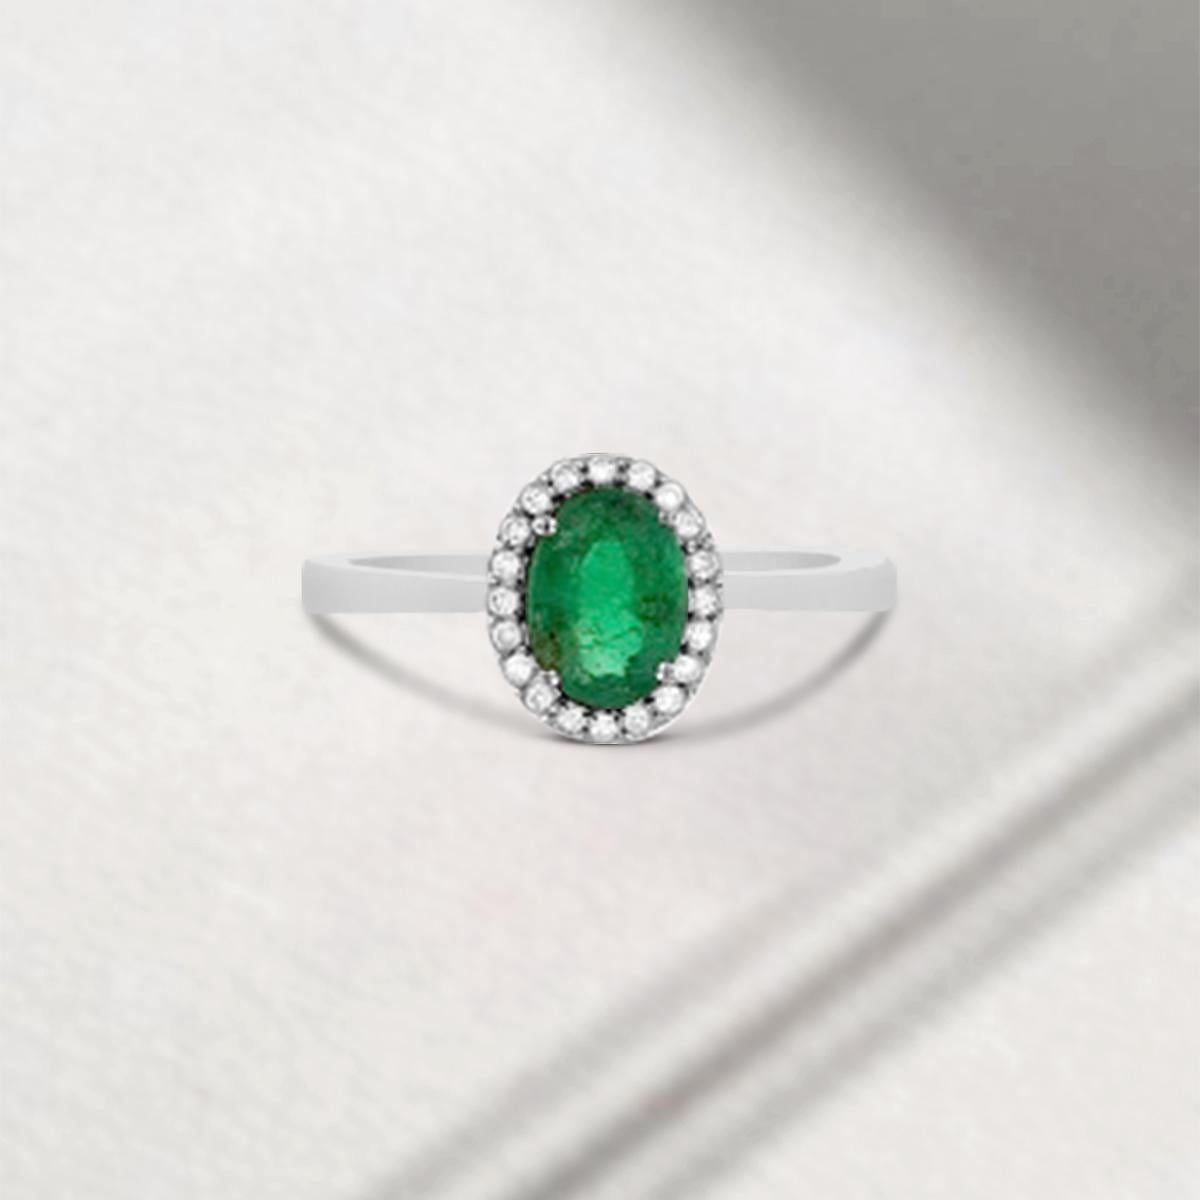 This Gorgeous Green Goddess Is Stunningly Beautiful! The Unique Emerald Ring With Diamonds Features A Genuine And Natural Oval Shape 7X5mm Green Emerald That Is Complimented By  Diamonds In A Halo Fashion. The Colored Gemstone and Diamonds Rest On